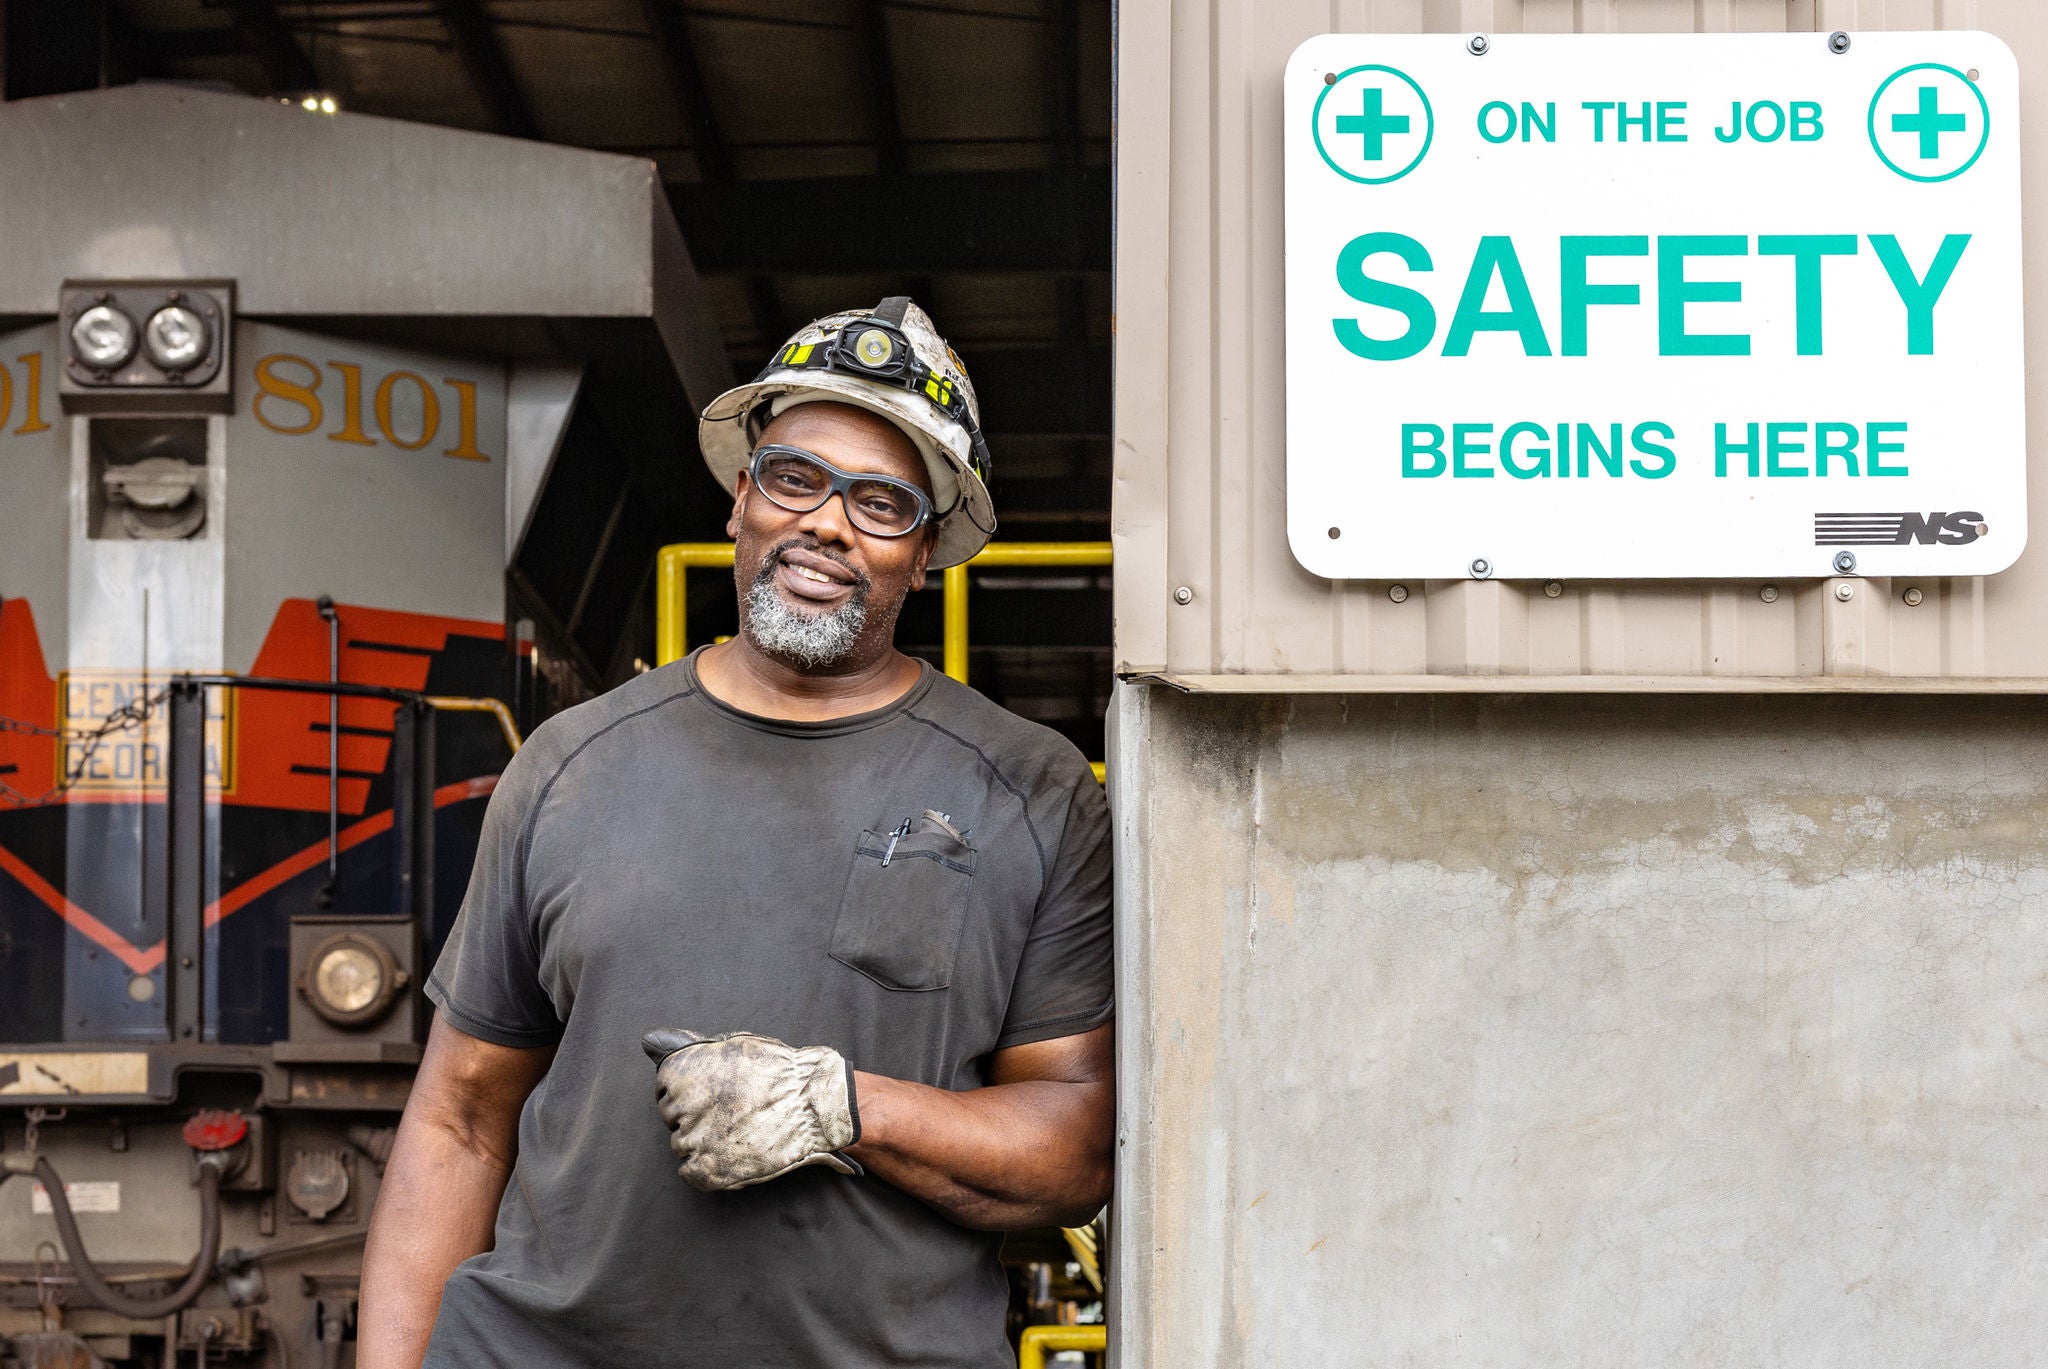 norfolk southern craft employee in railway job in maintenance shop with safety sign begins here sign